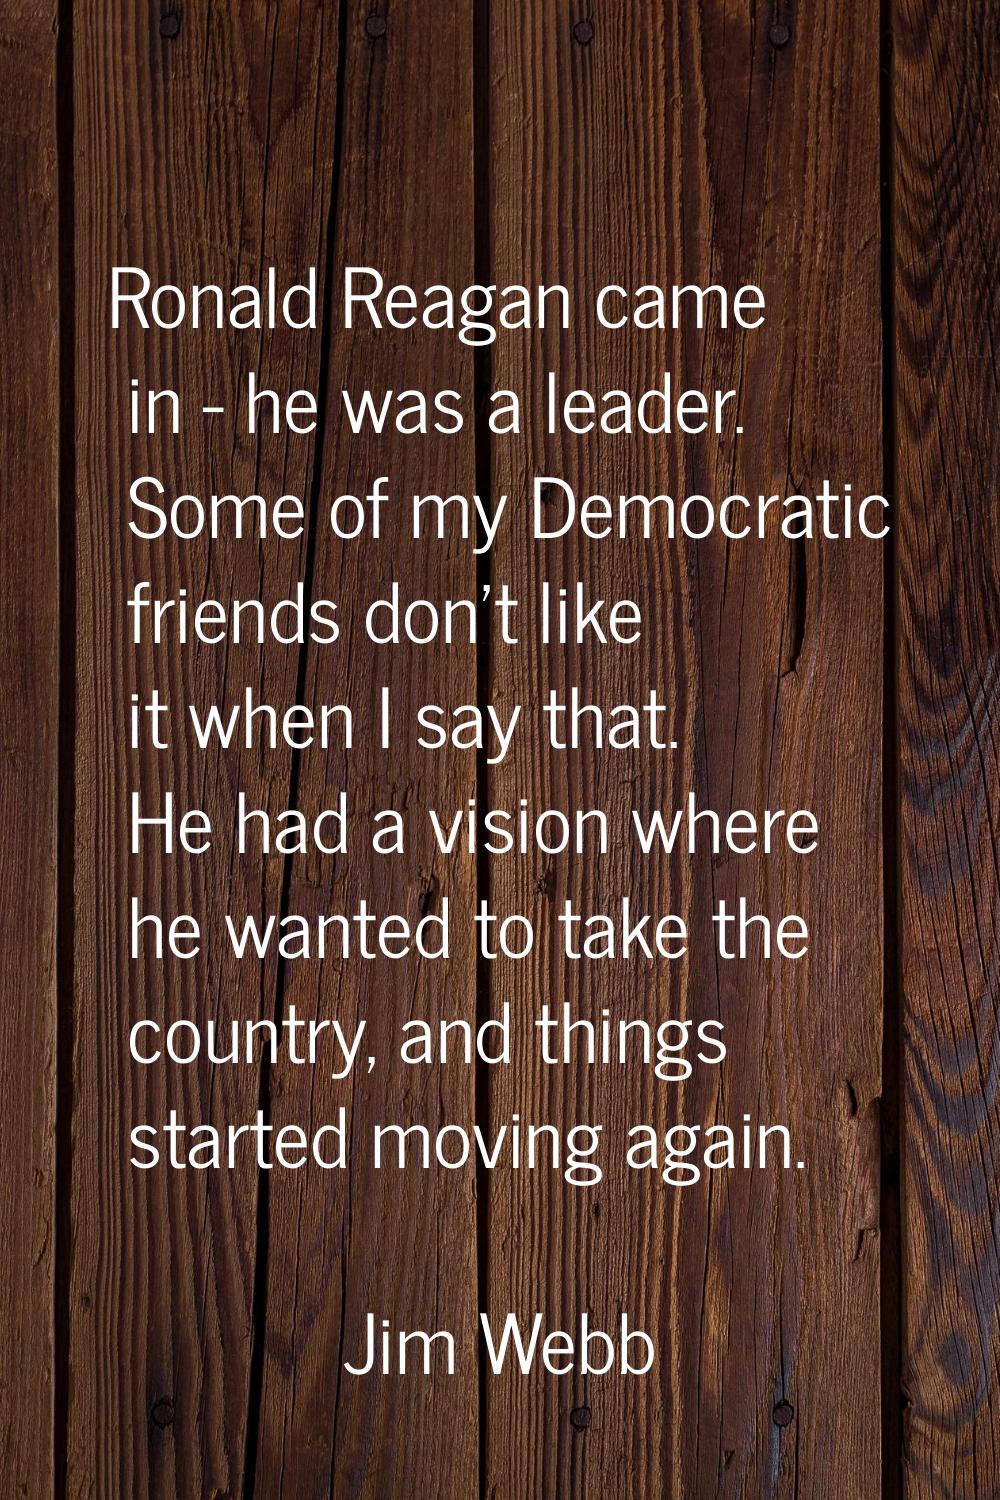 Ronald Reagan came in - he was a leader. Some of my Democratic friends don't like it when I say tha